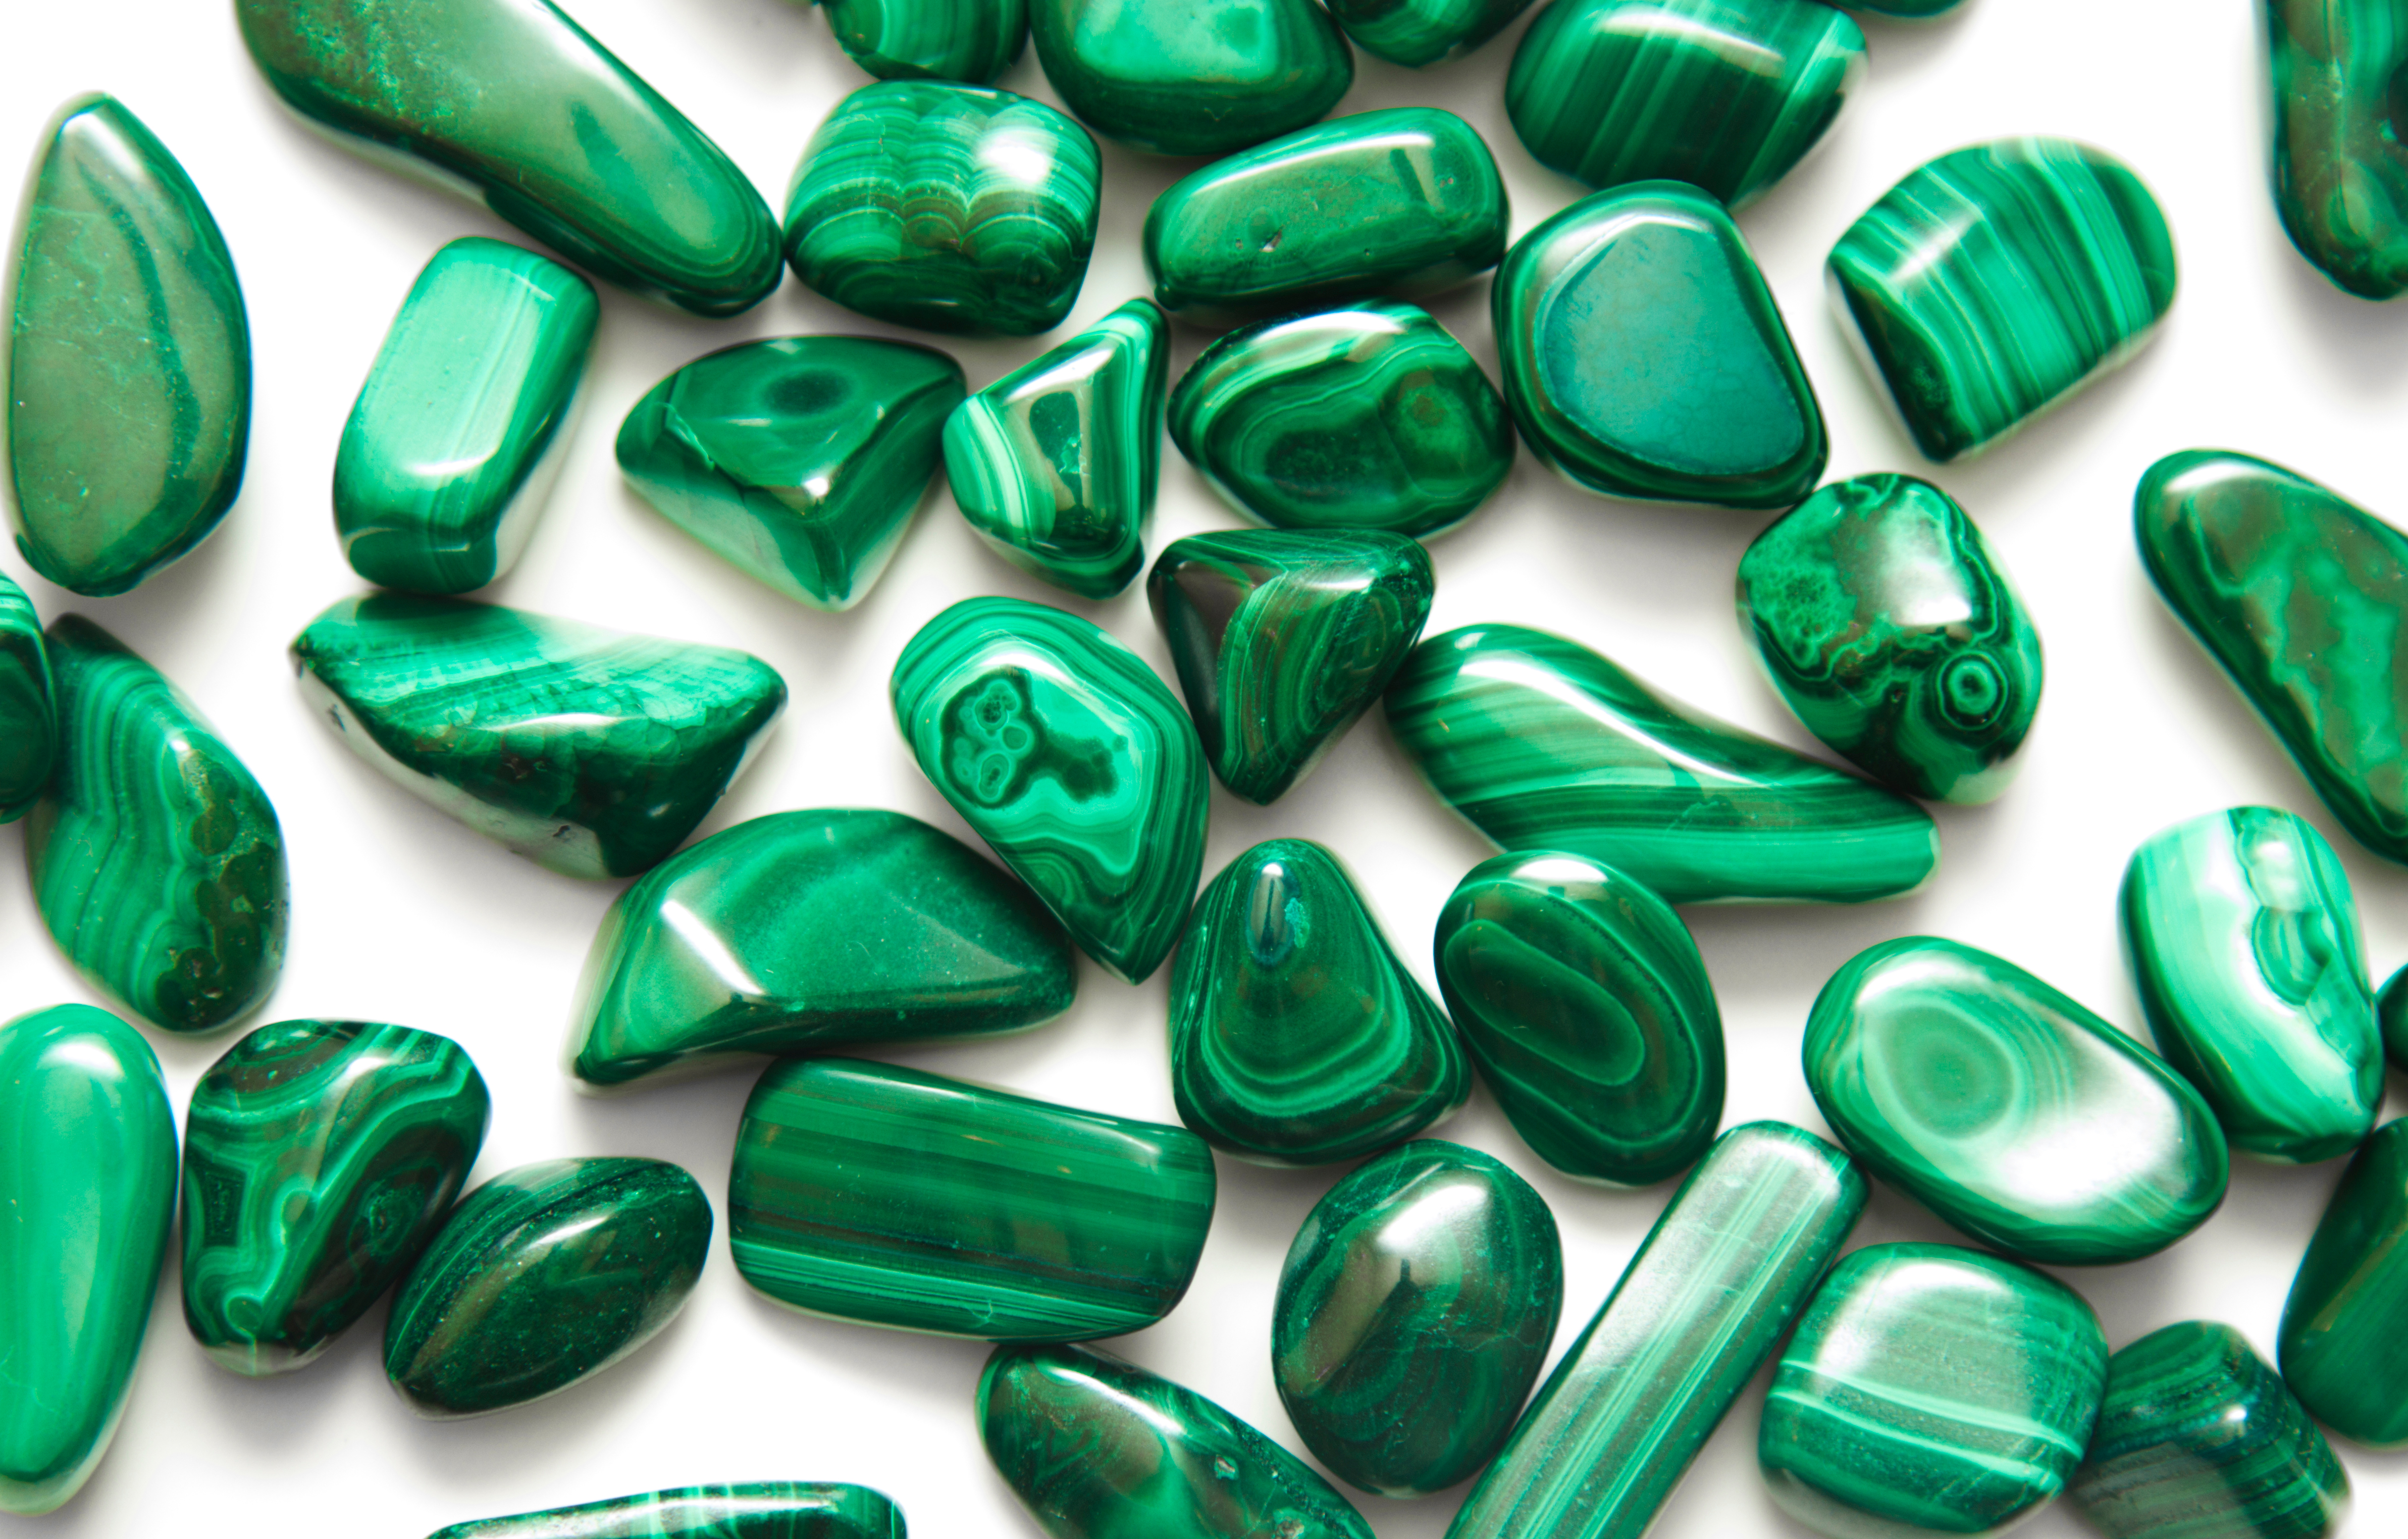 Lots of little pieces of Malachite